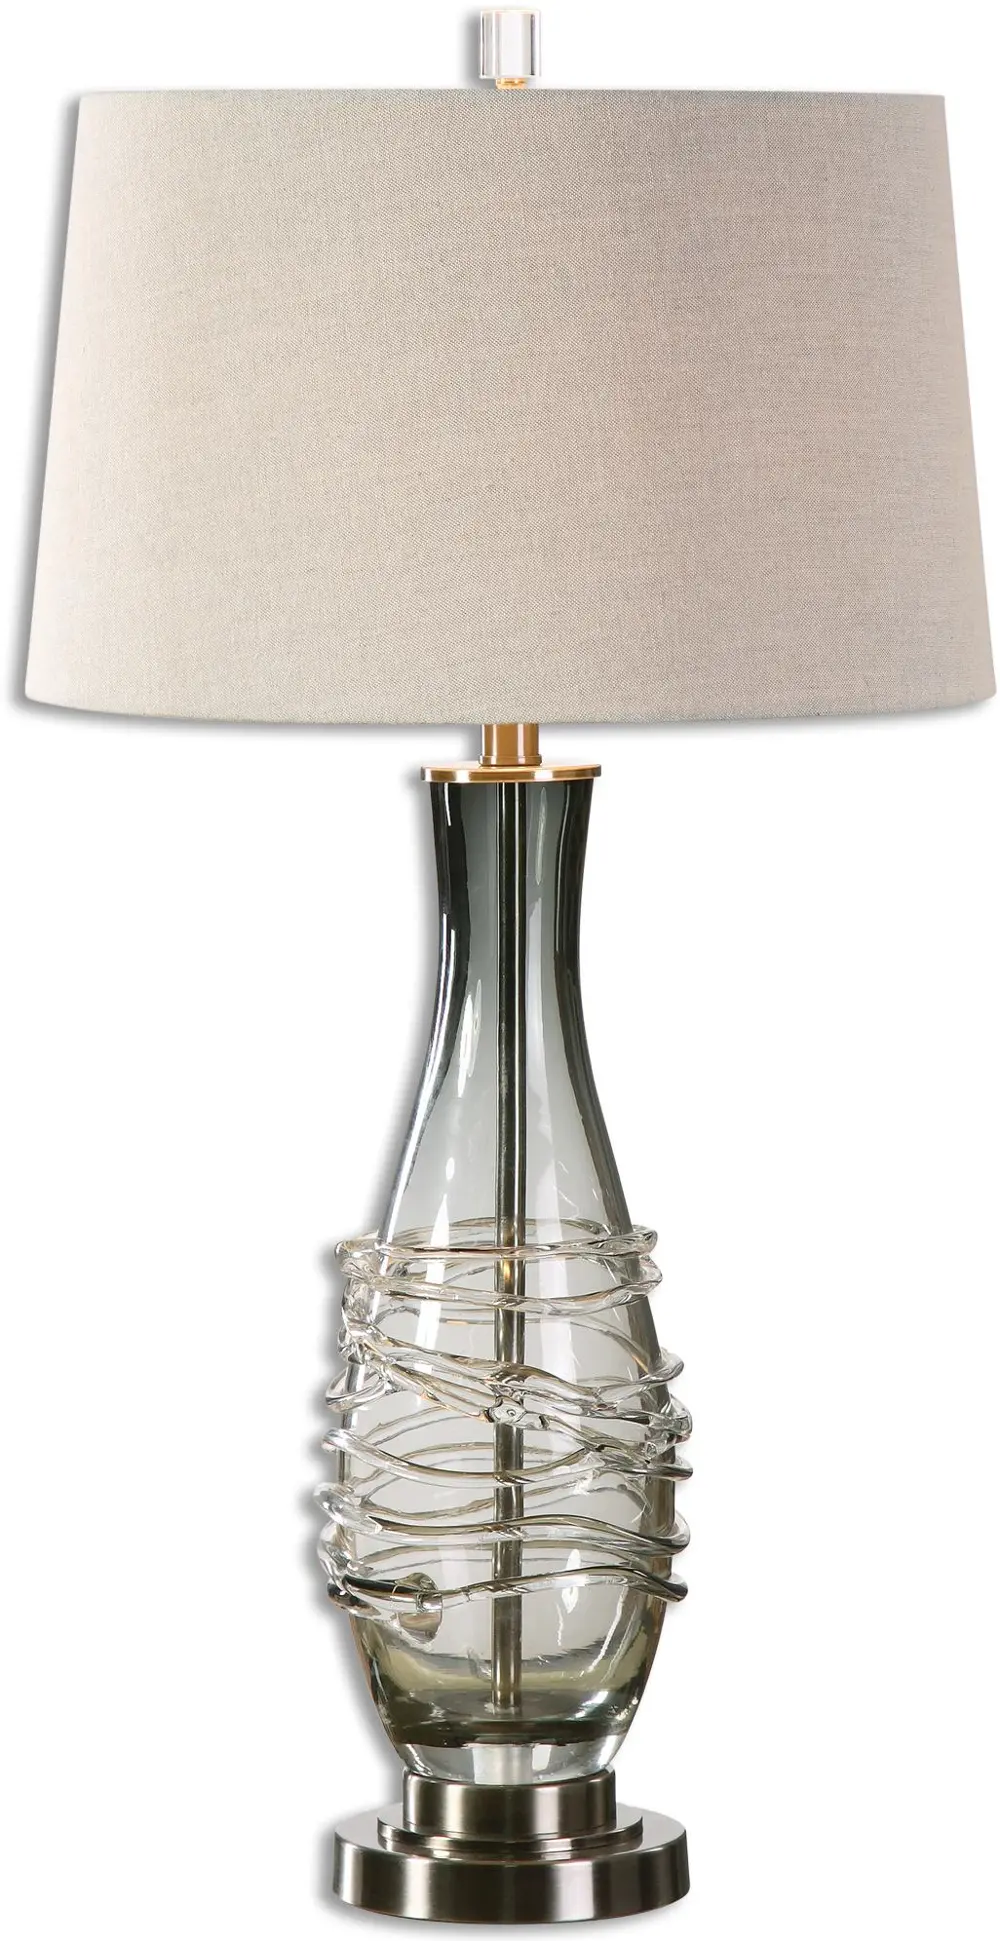 Translucent Charcoal Gray Glass Table Lamp-1